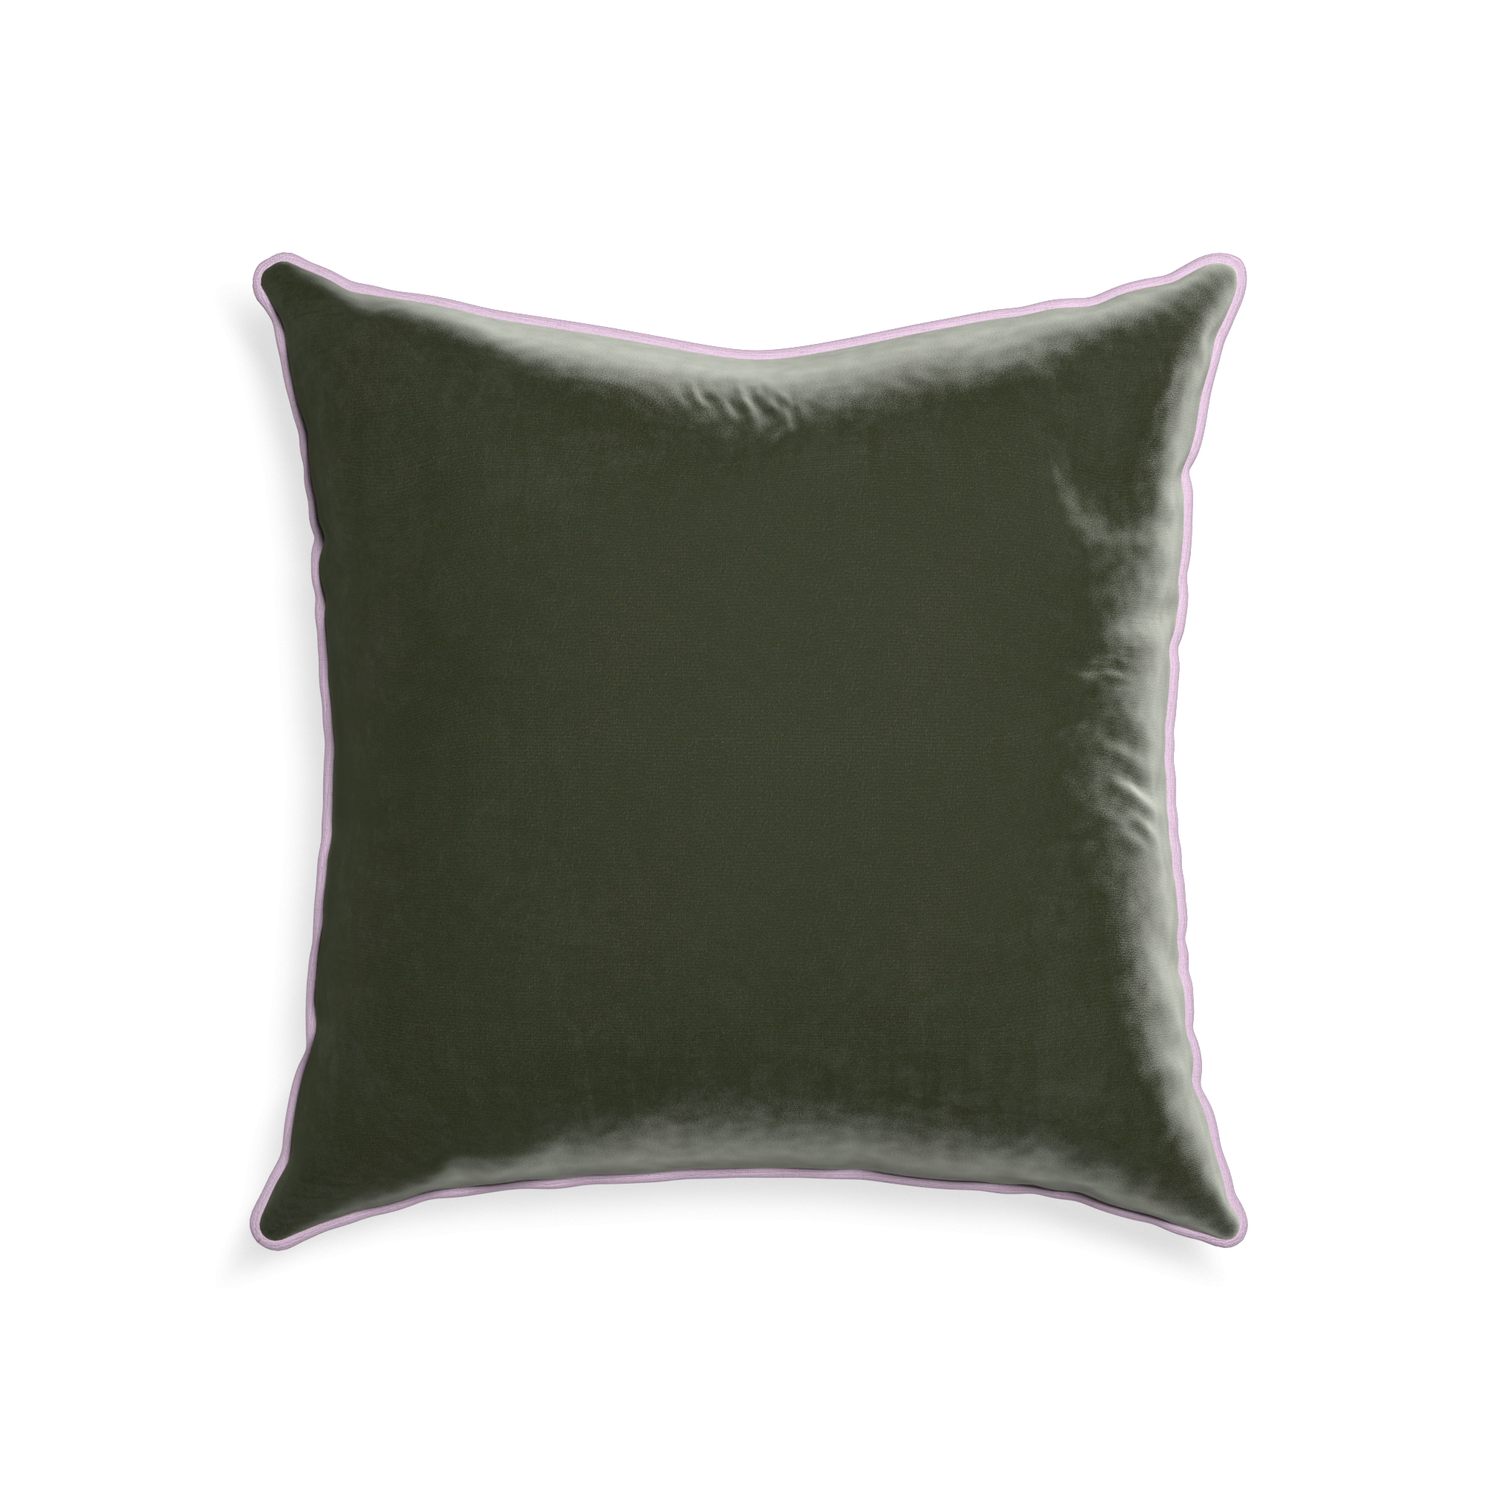 square fern green velvet pillow with lilac piping